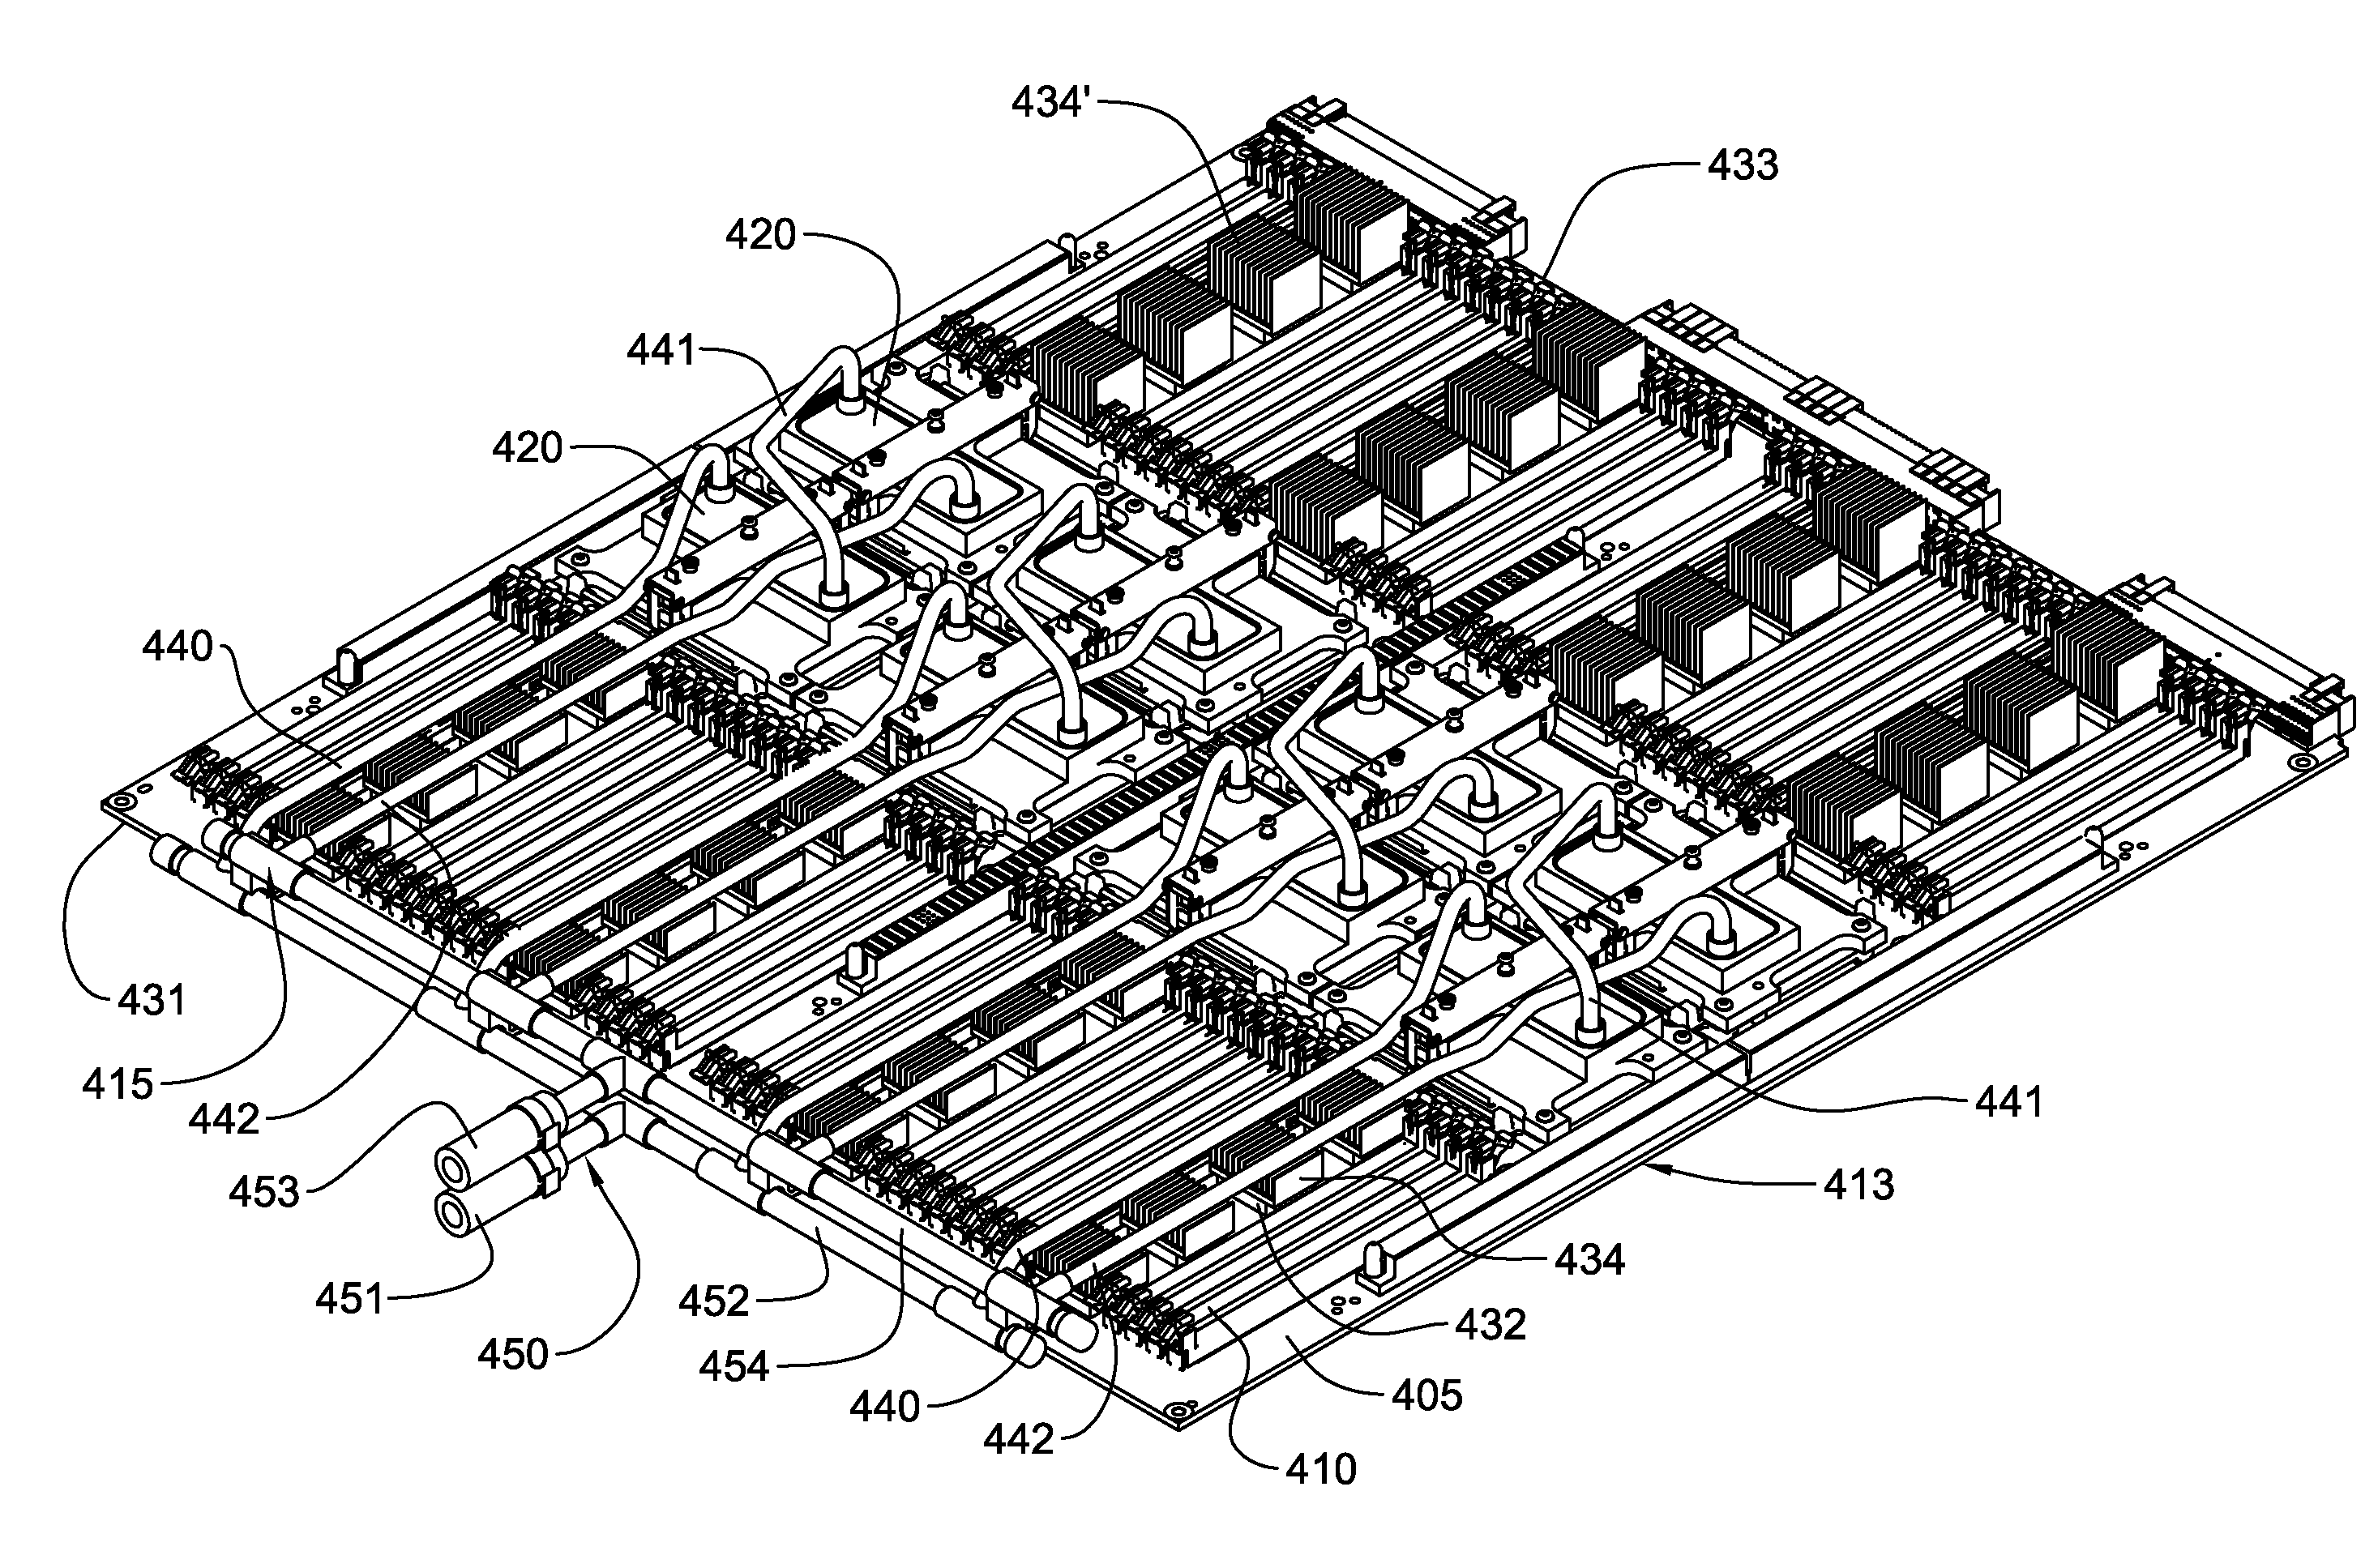 Two-phase, water-based immersion-cooling apparatus with passive deionization